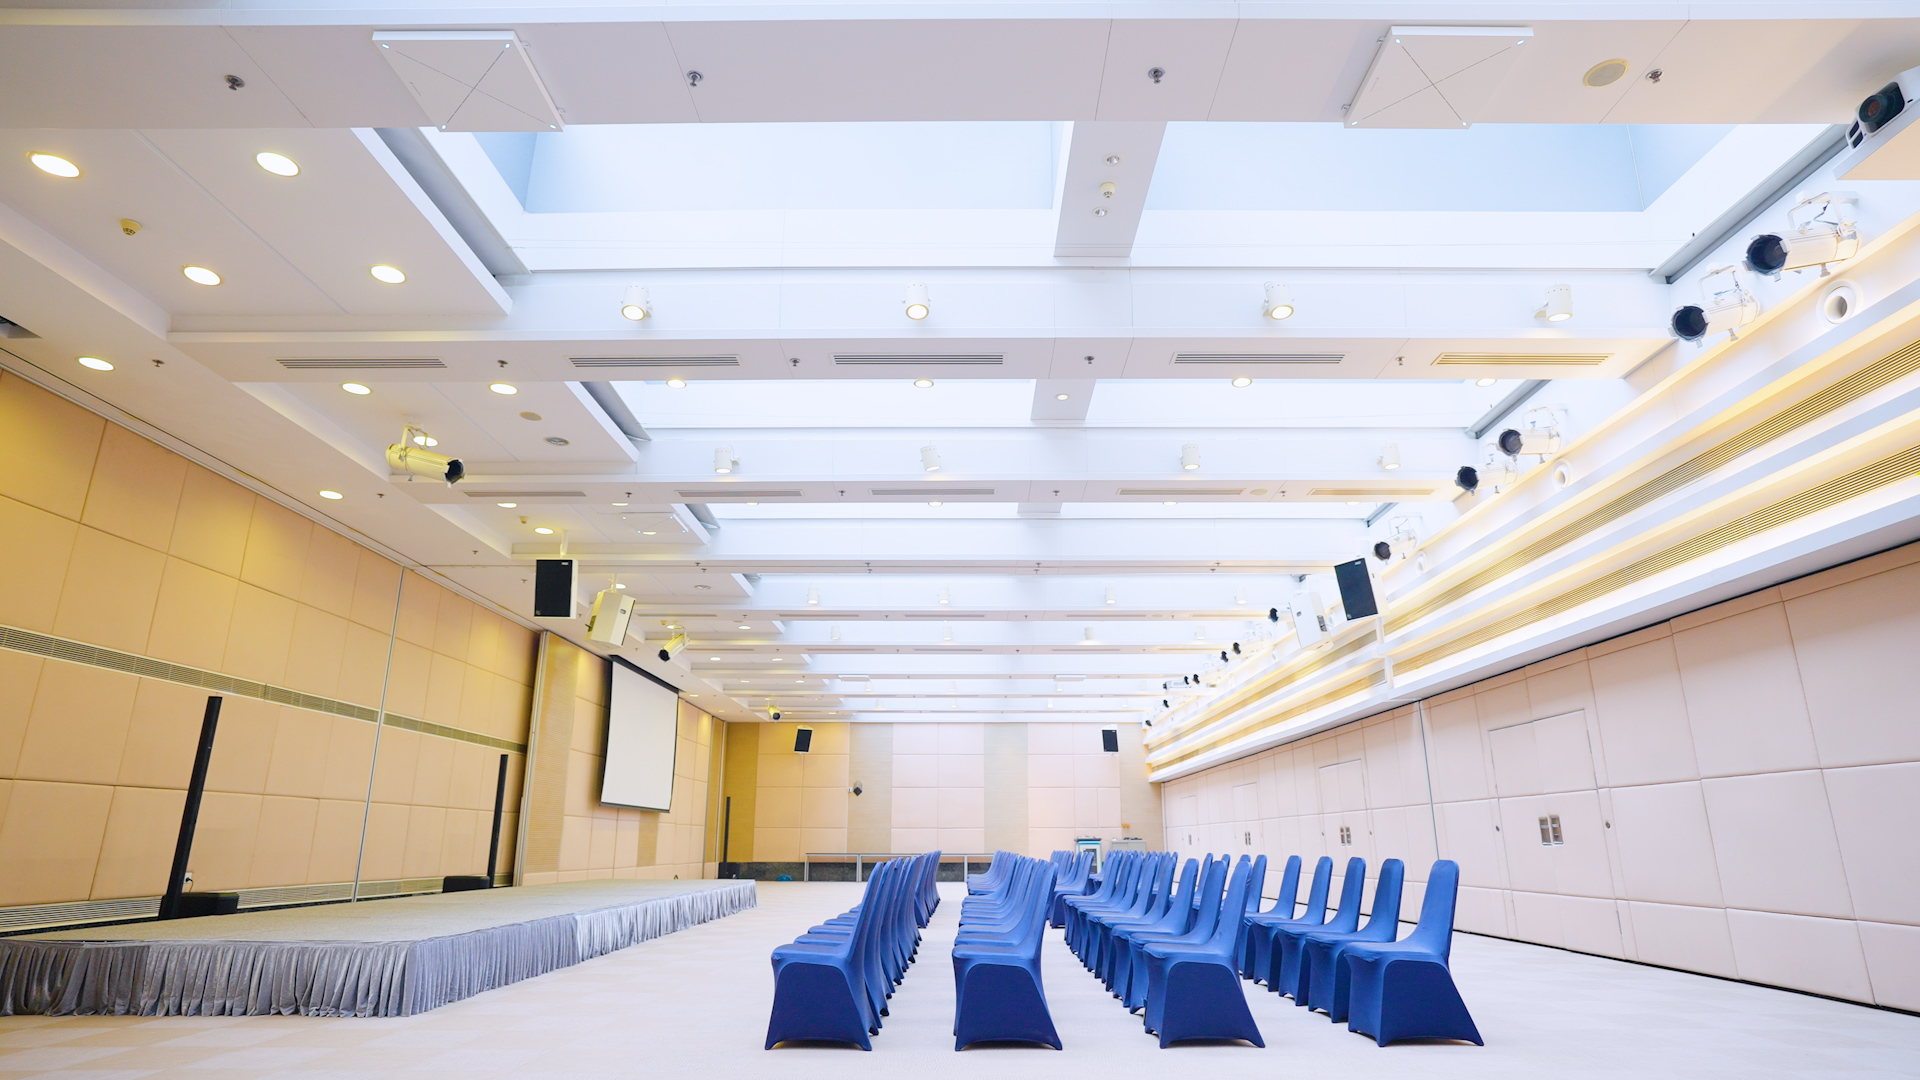 German Centre Shanghai installed 5 TCC 2s in its combined large meeting room